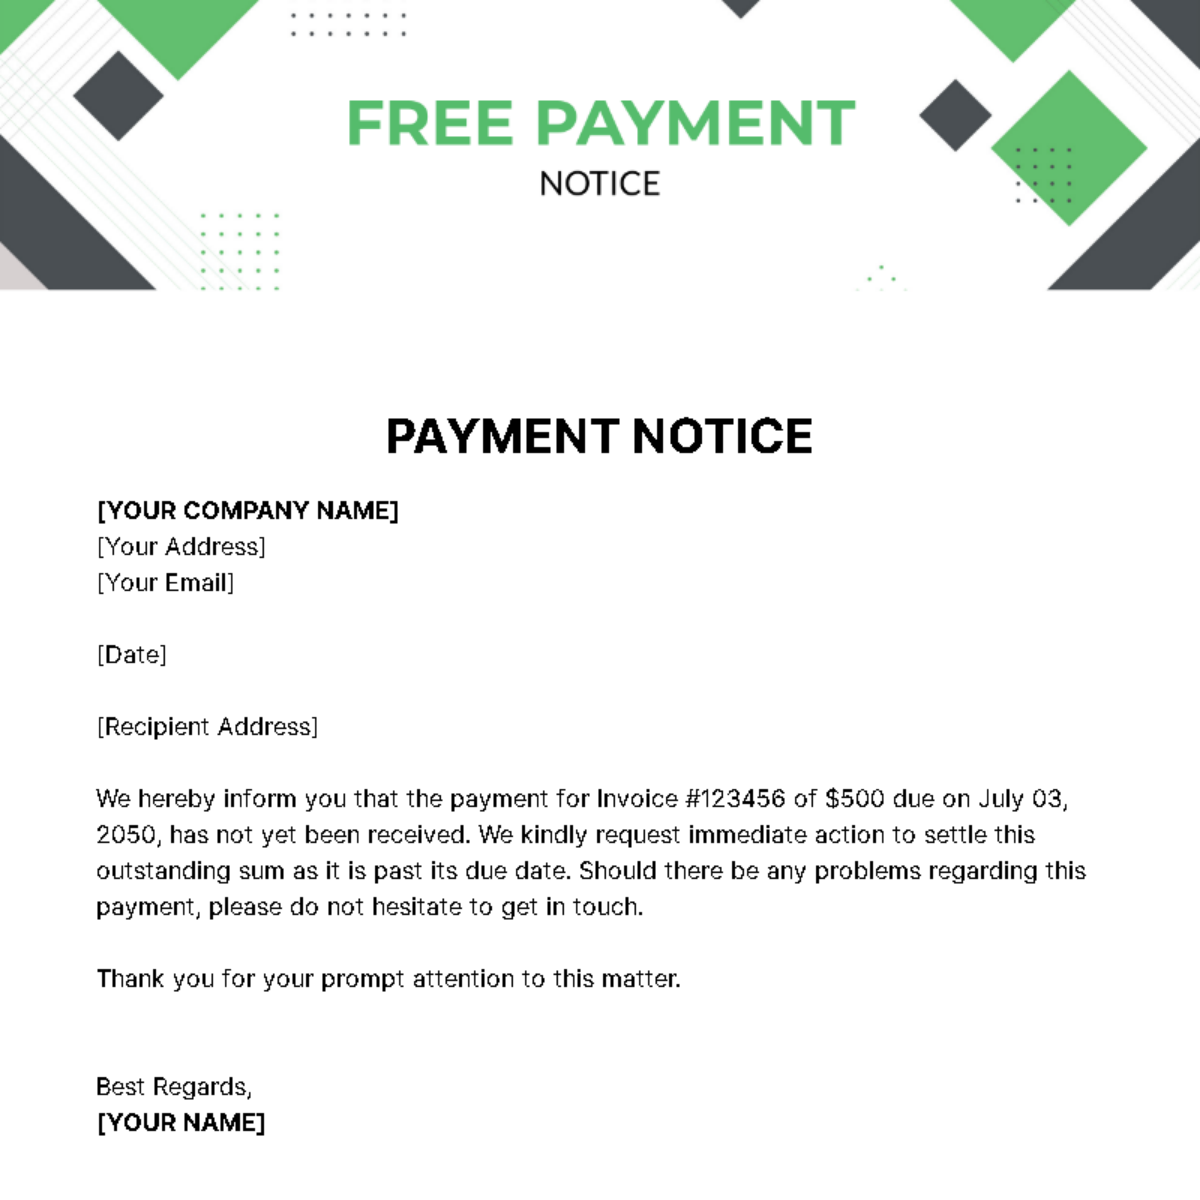 Free Payment Notice Template